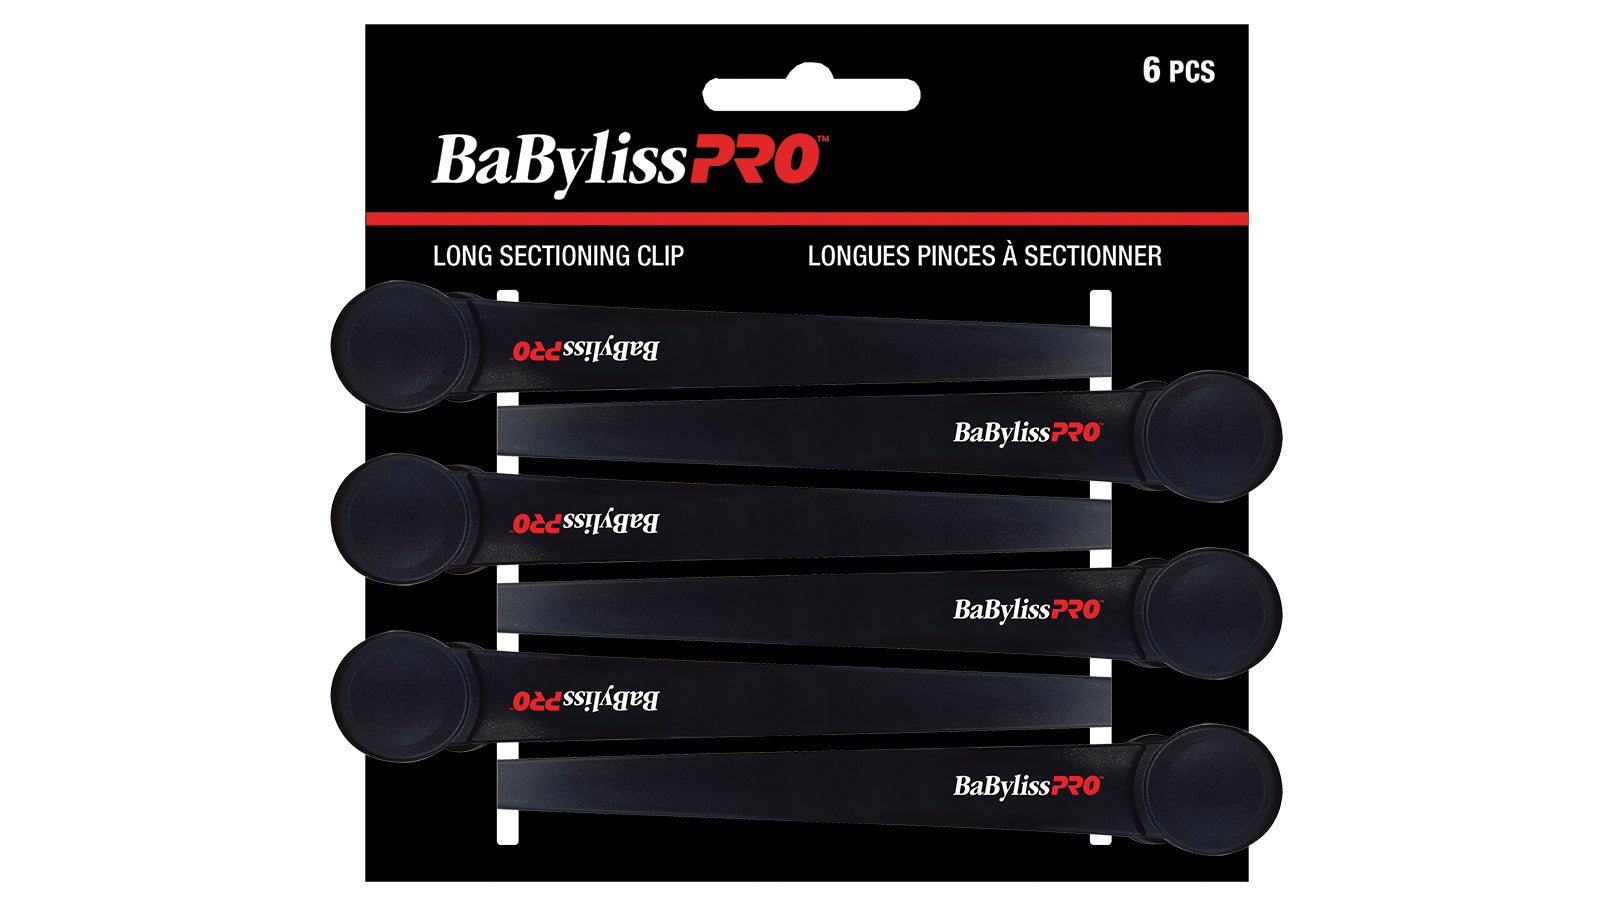 BabylissPro Sectioning Clips - Long Clip